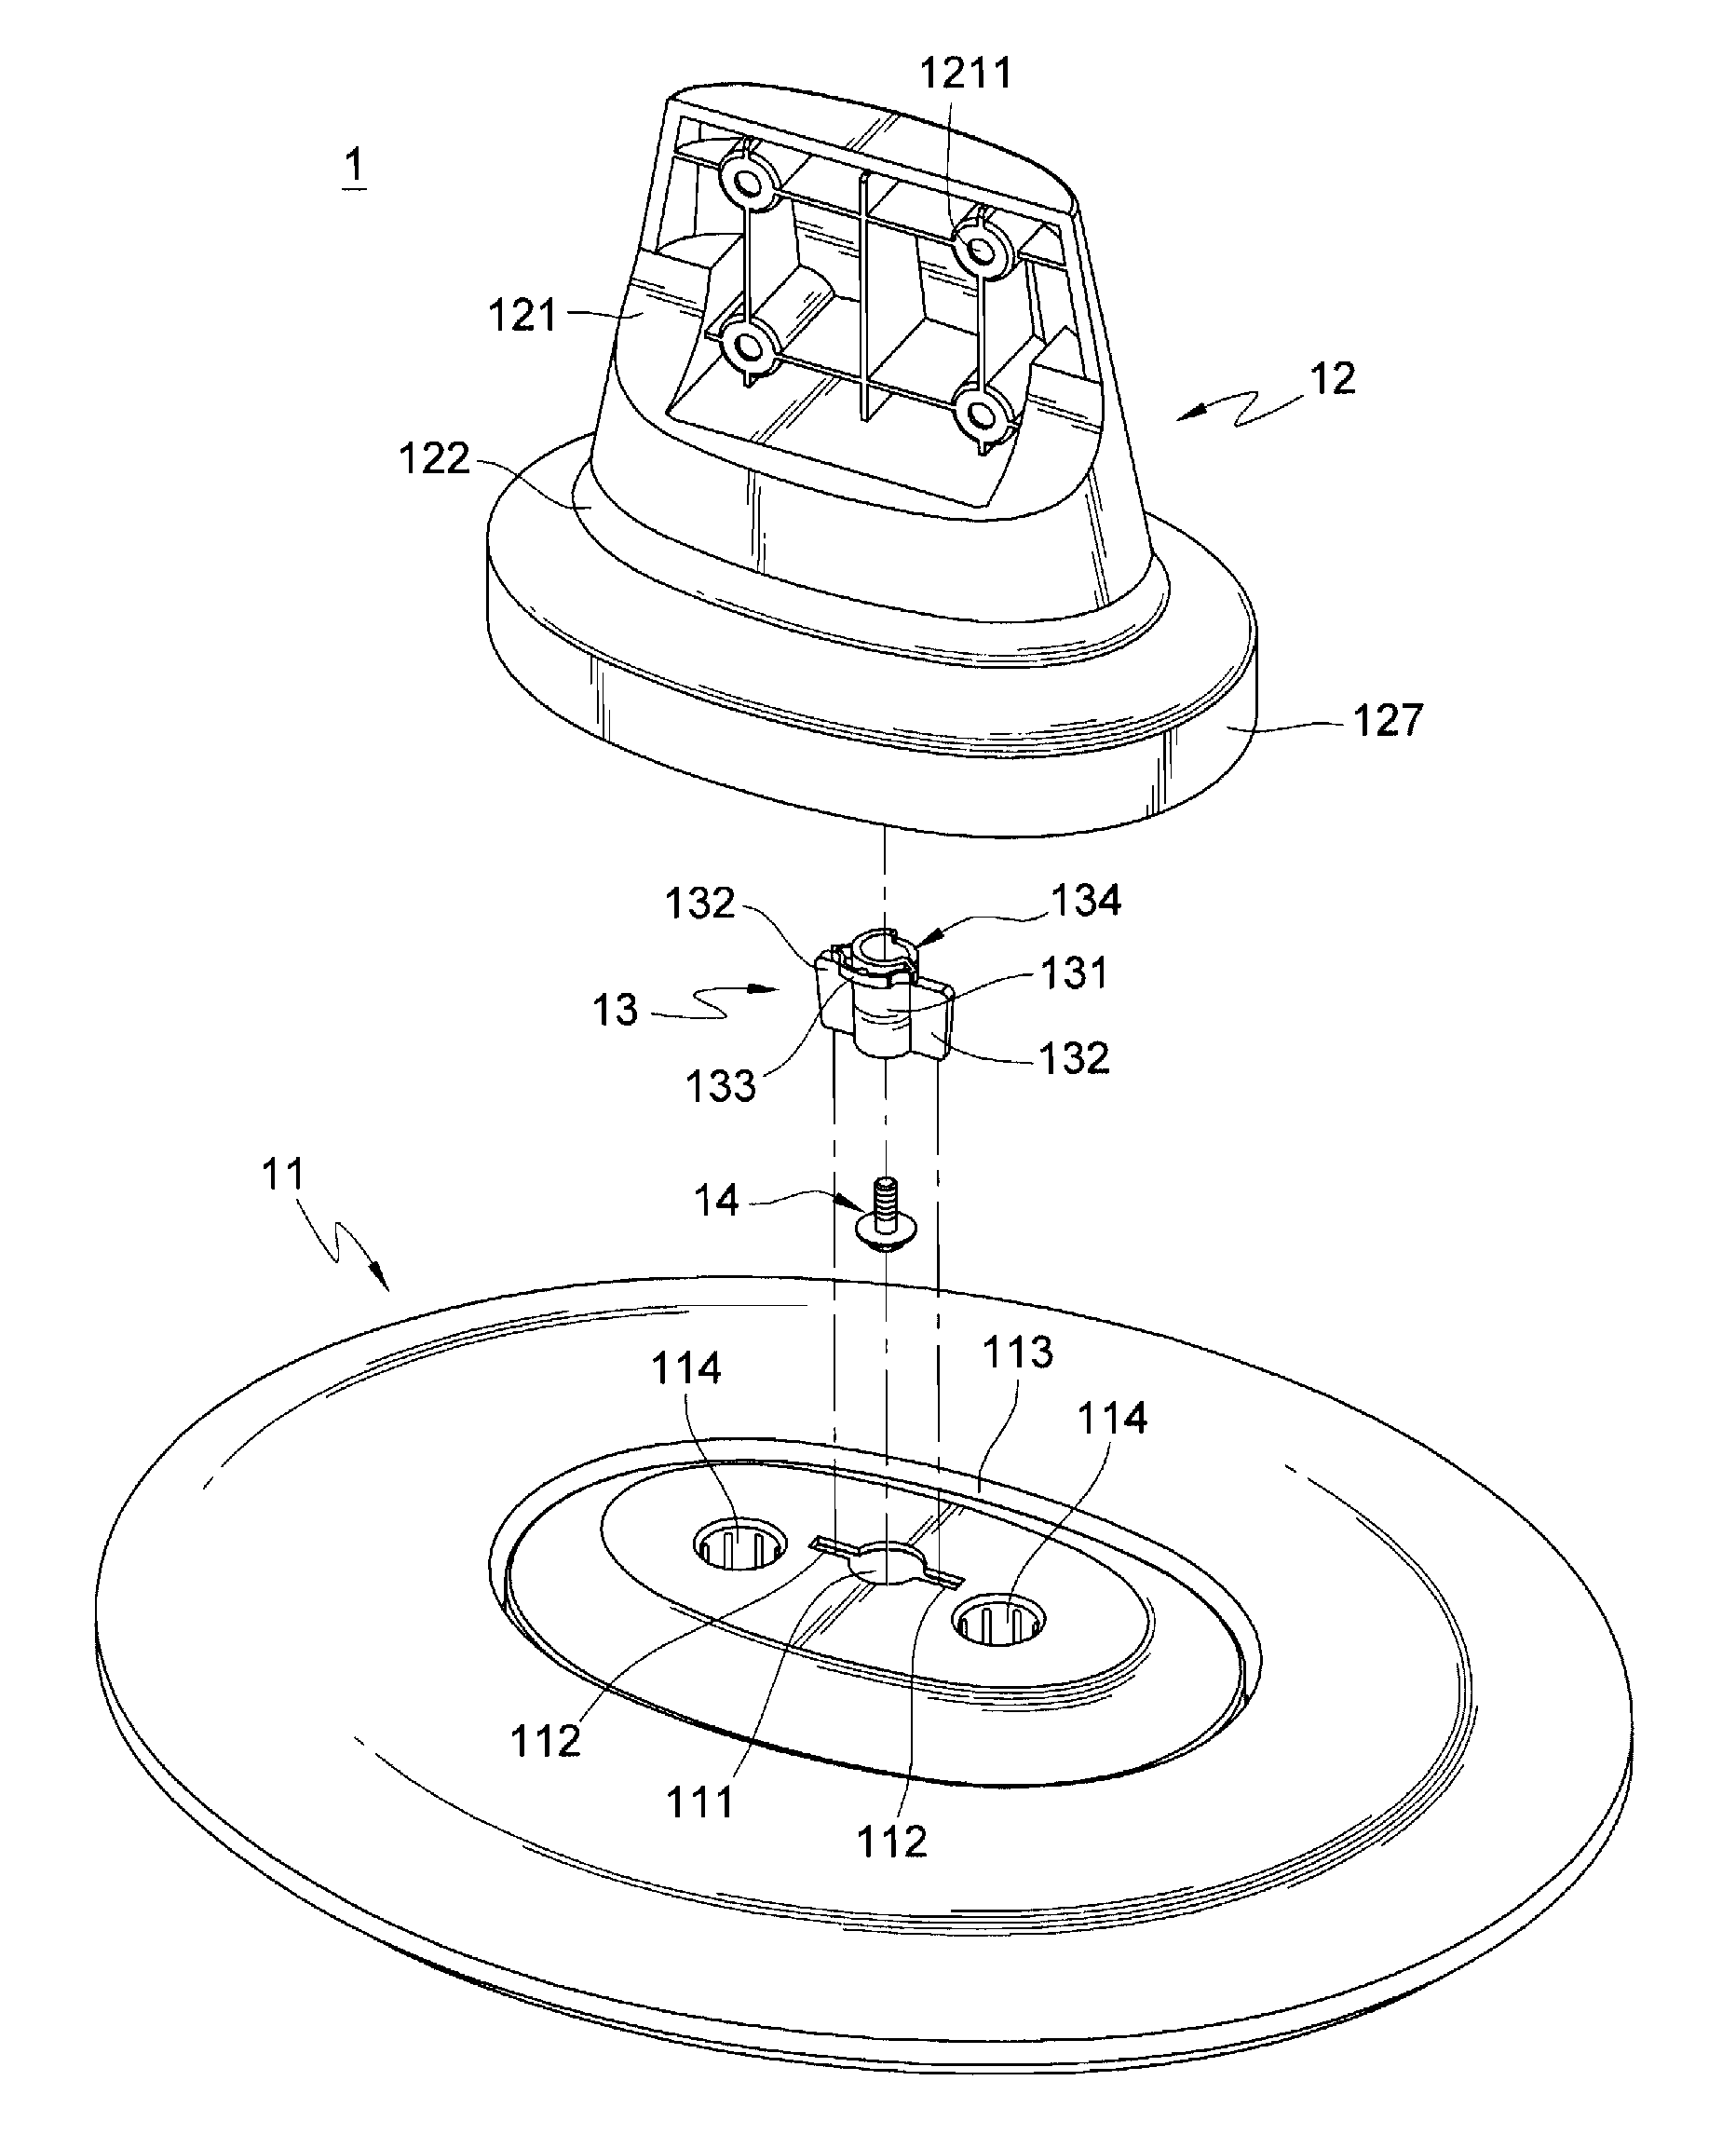 Liquid crystal display and base structure thereof